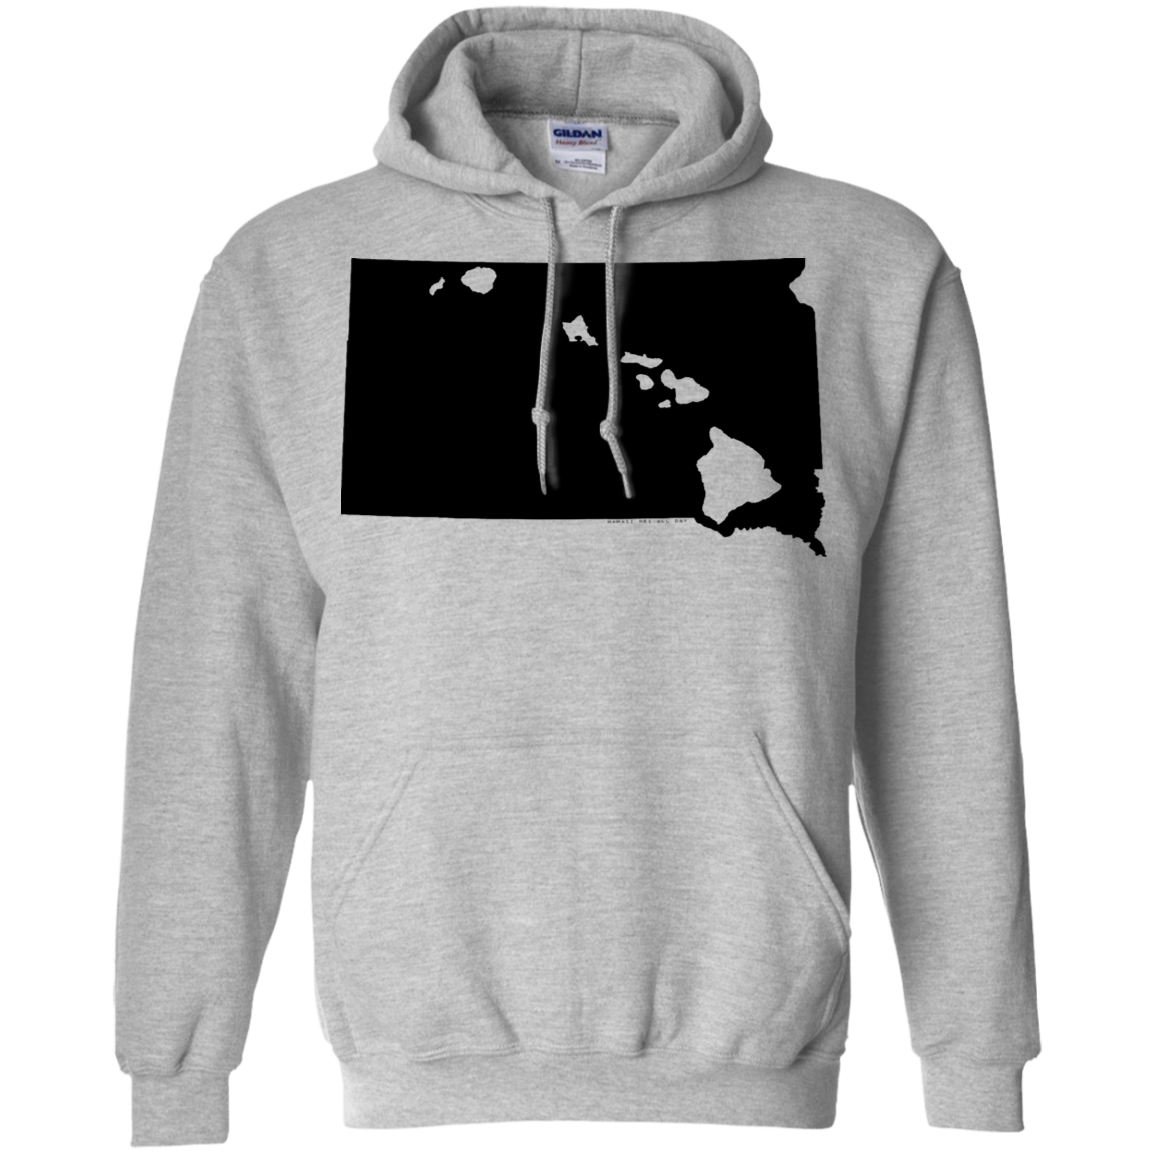 Living in South Dakota with Hawaii Roots Pullover Hoodie 8 oz., Sweatshirts, Hawaii Nei All Day